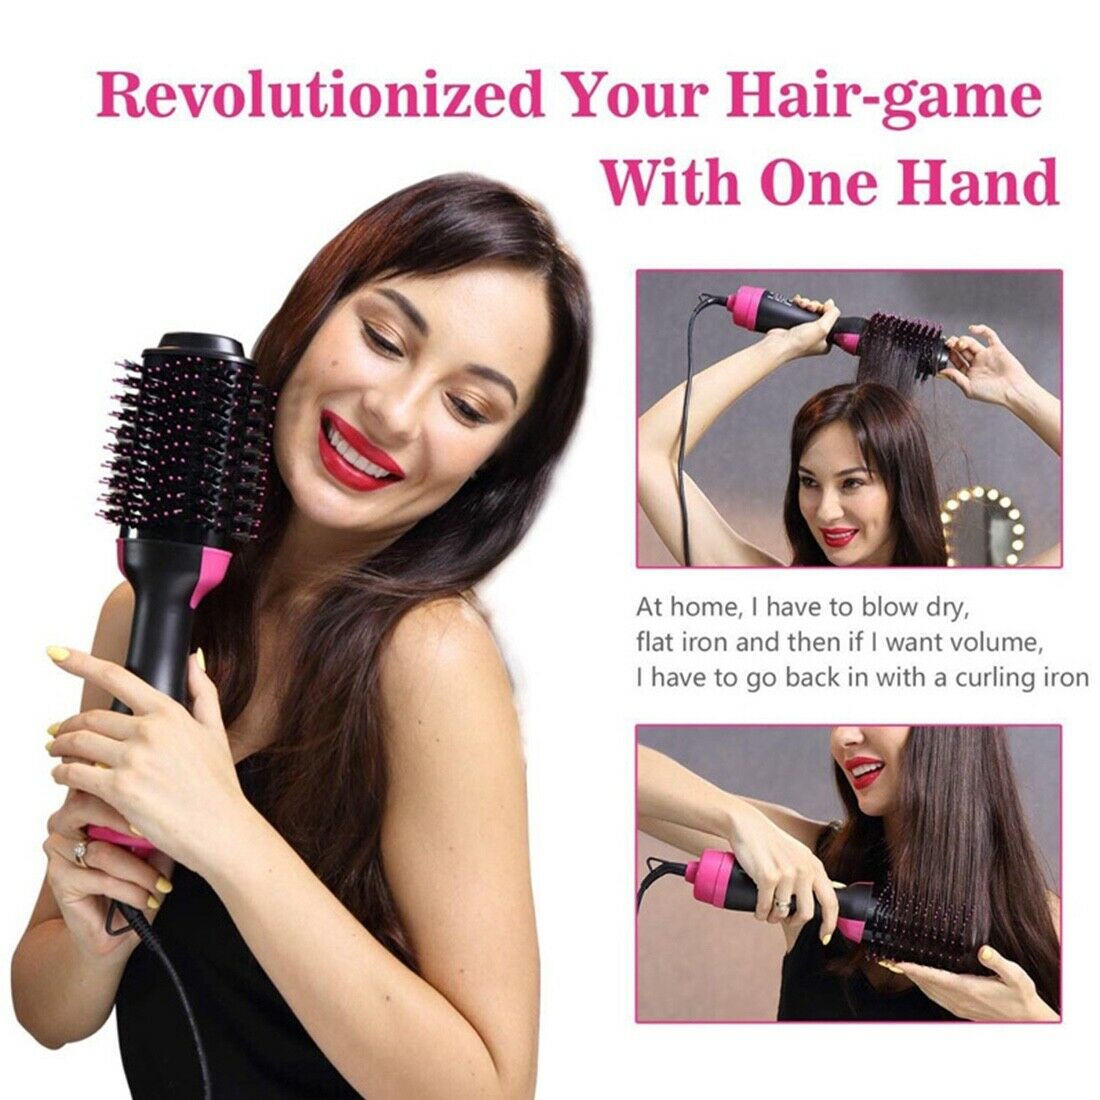 4 in1 Hair Dryer and Styler Volumizer Perfect for Fast Drying, Blowing Styling